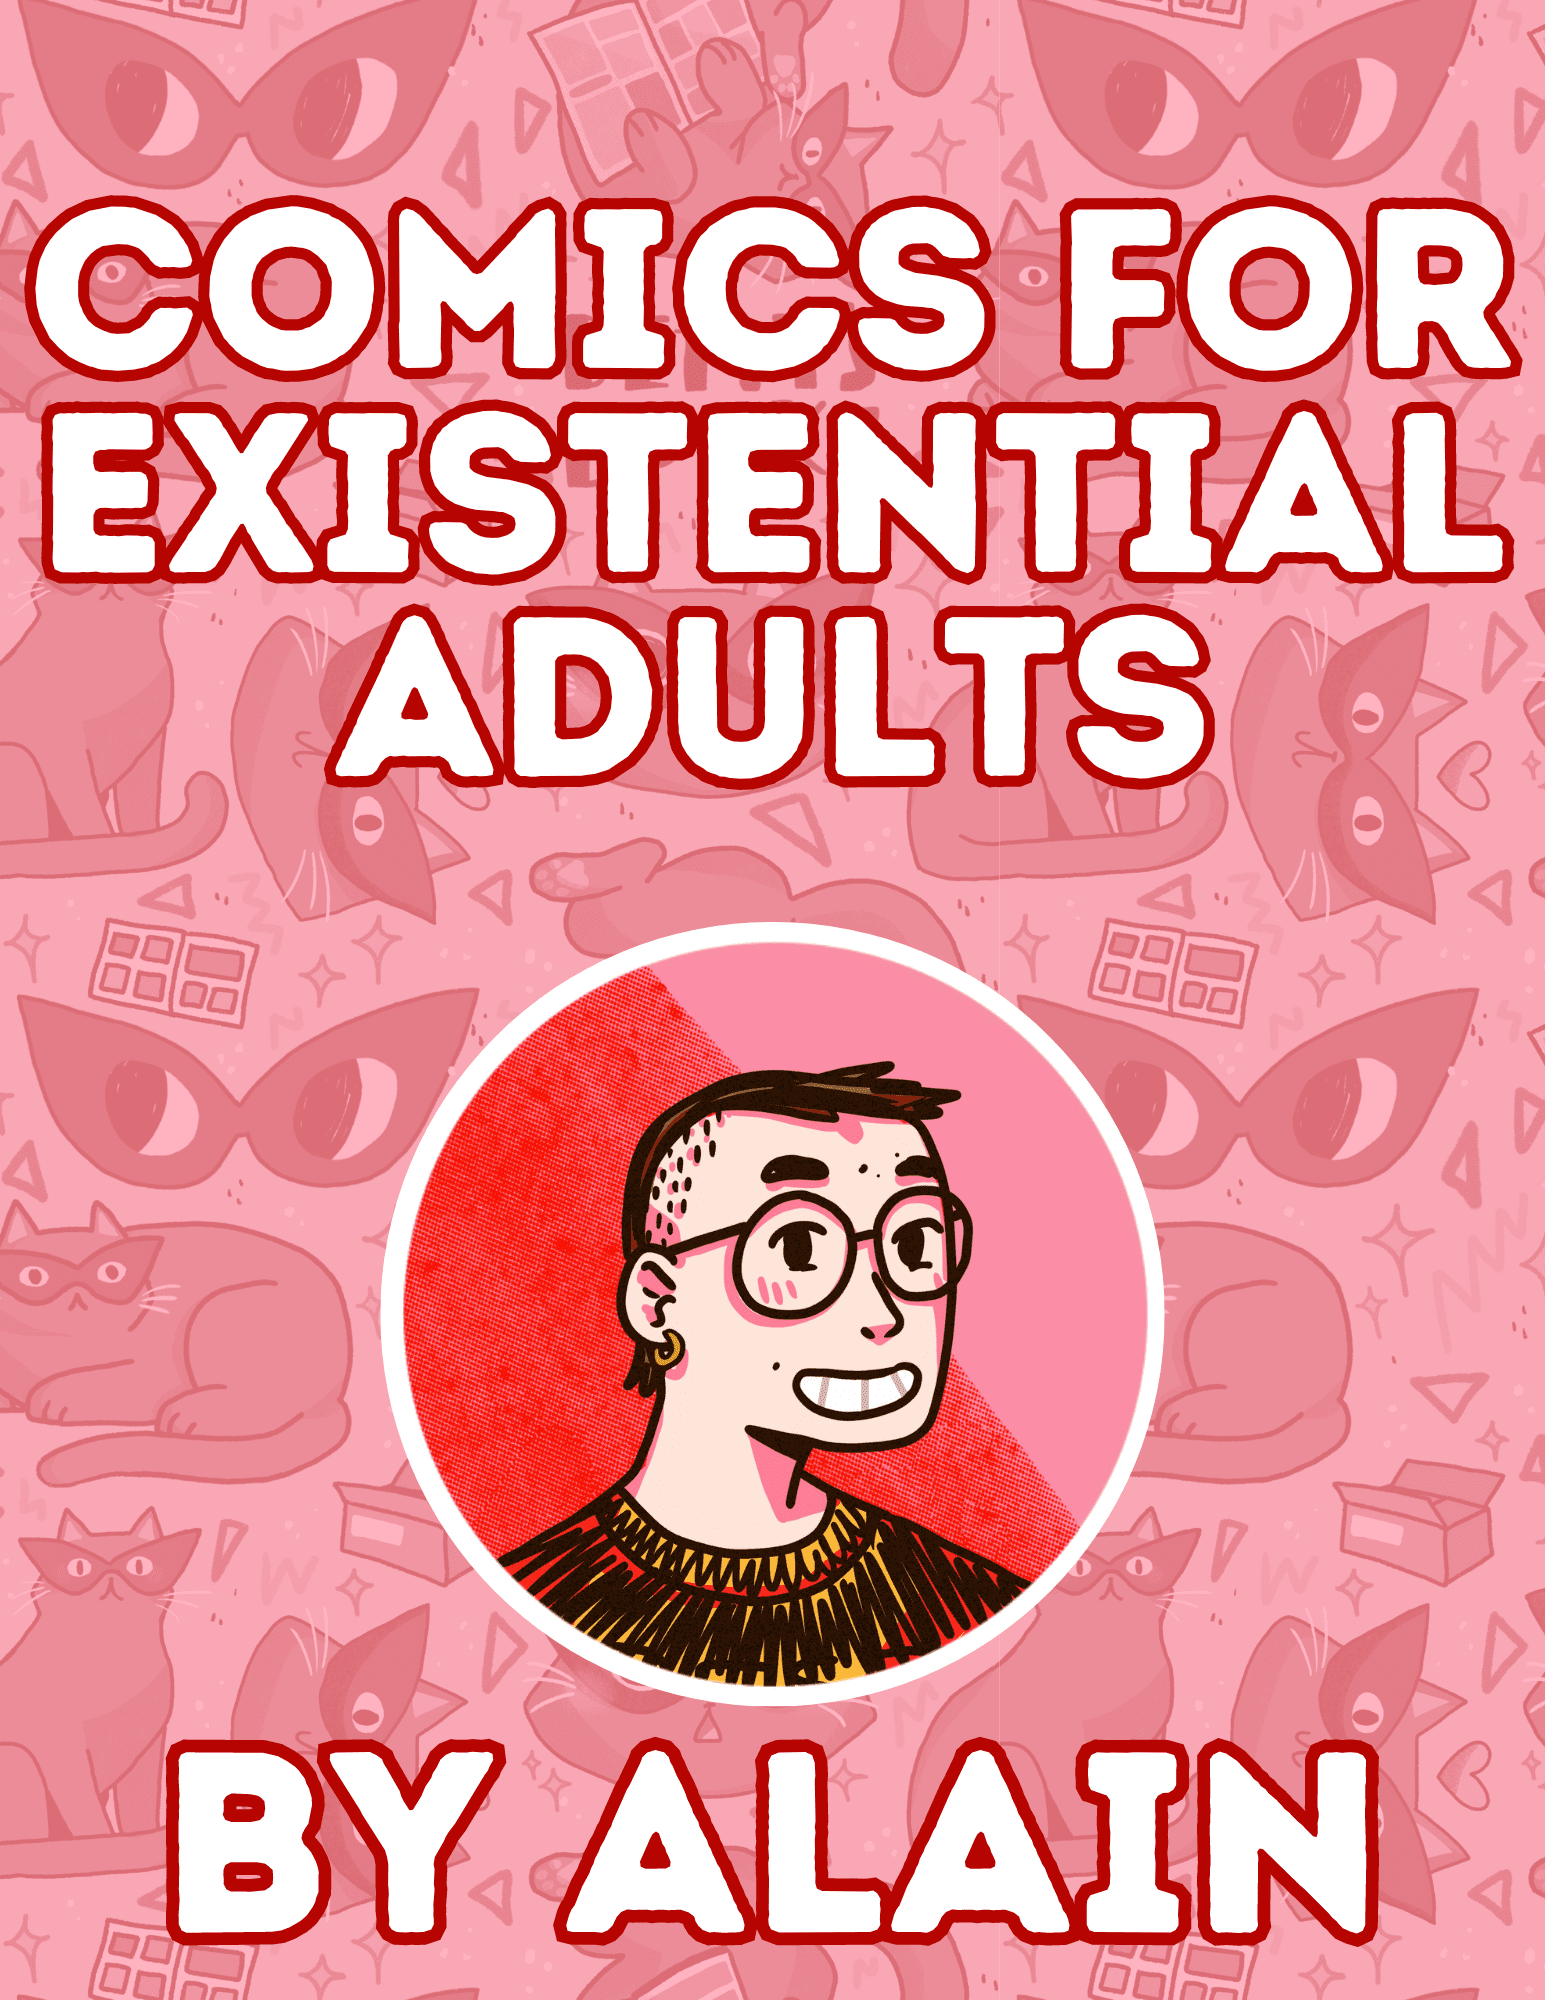 Comics for Existential Adults